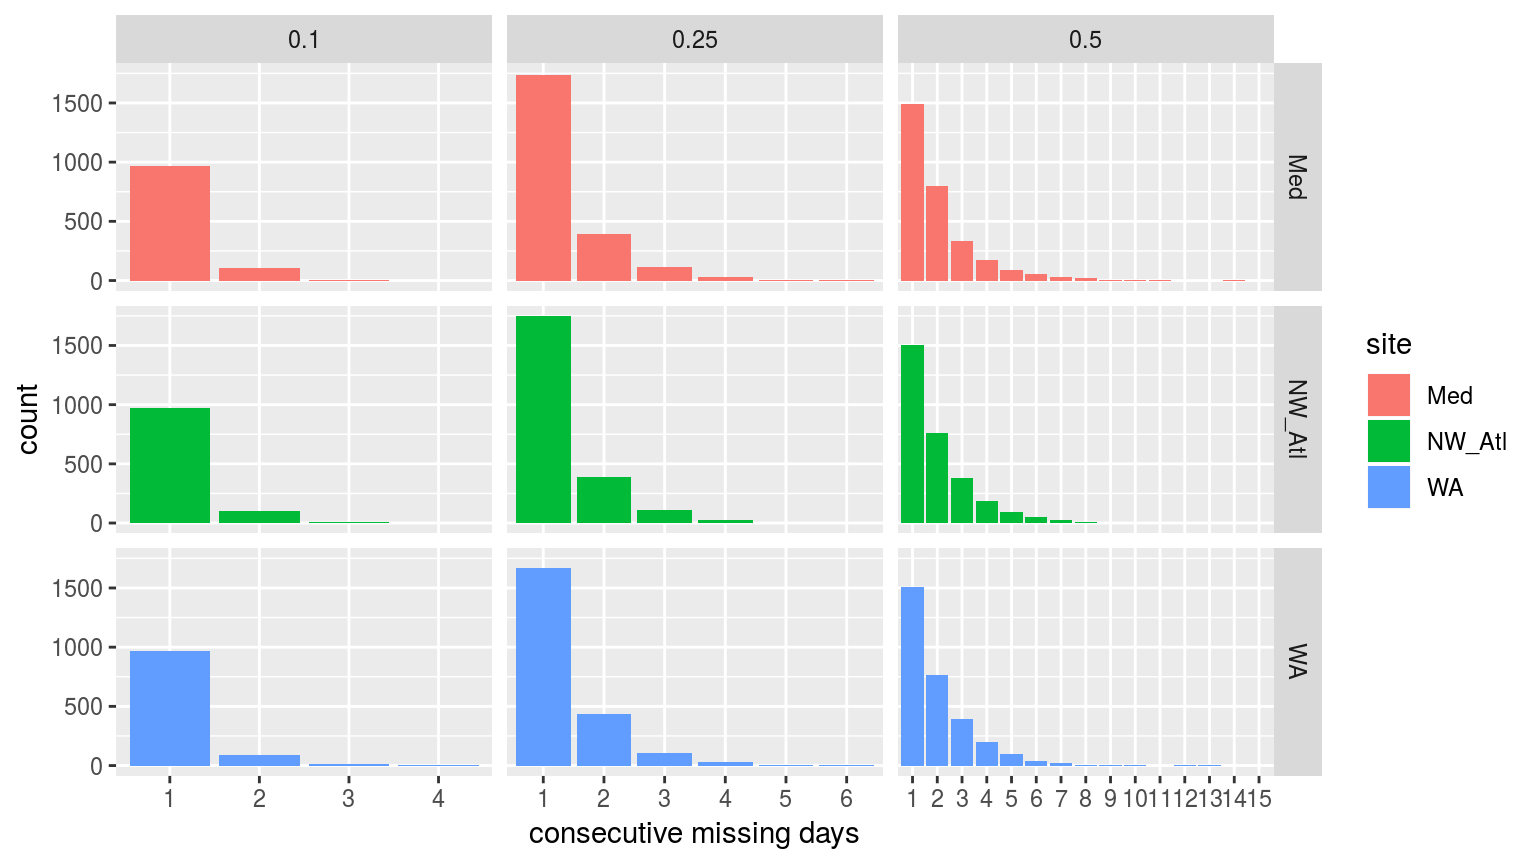 Bar plots showing the count of consecutive missing days of data per time series at the three different missing proportions.